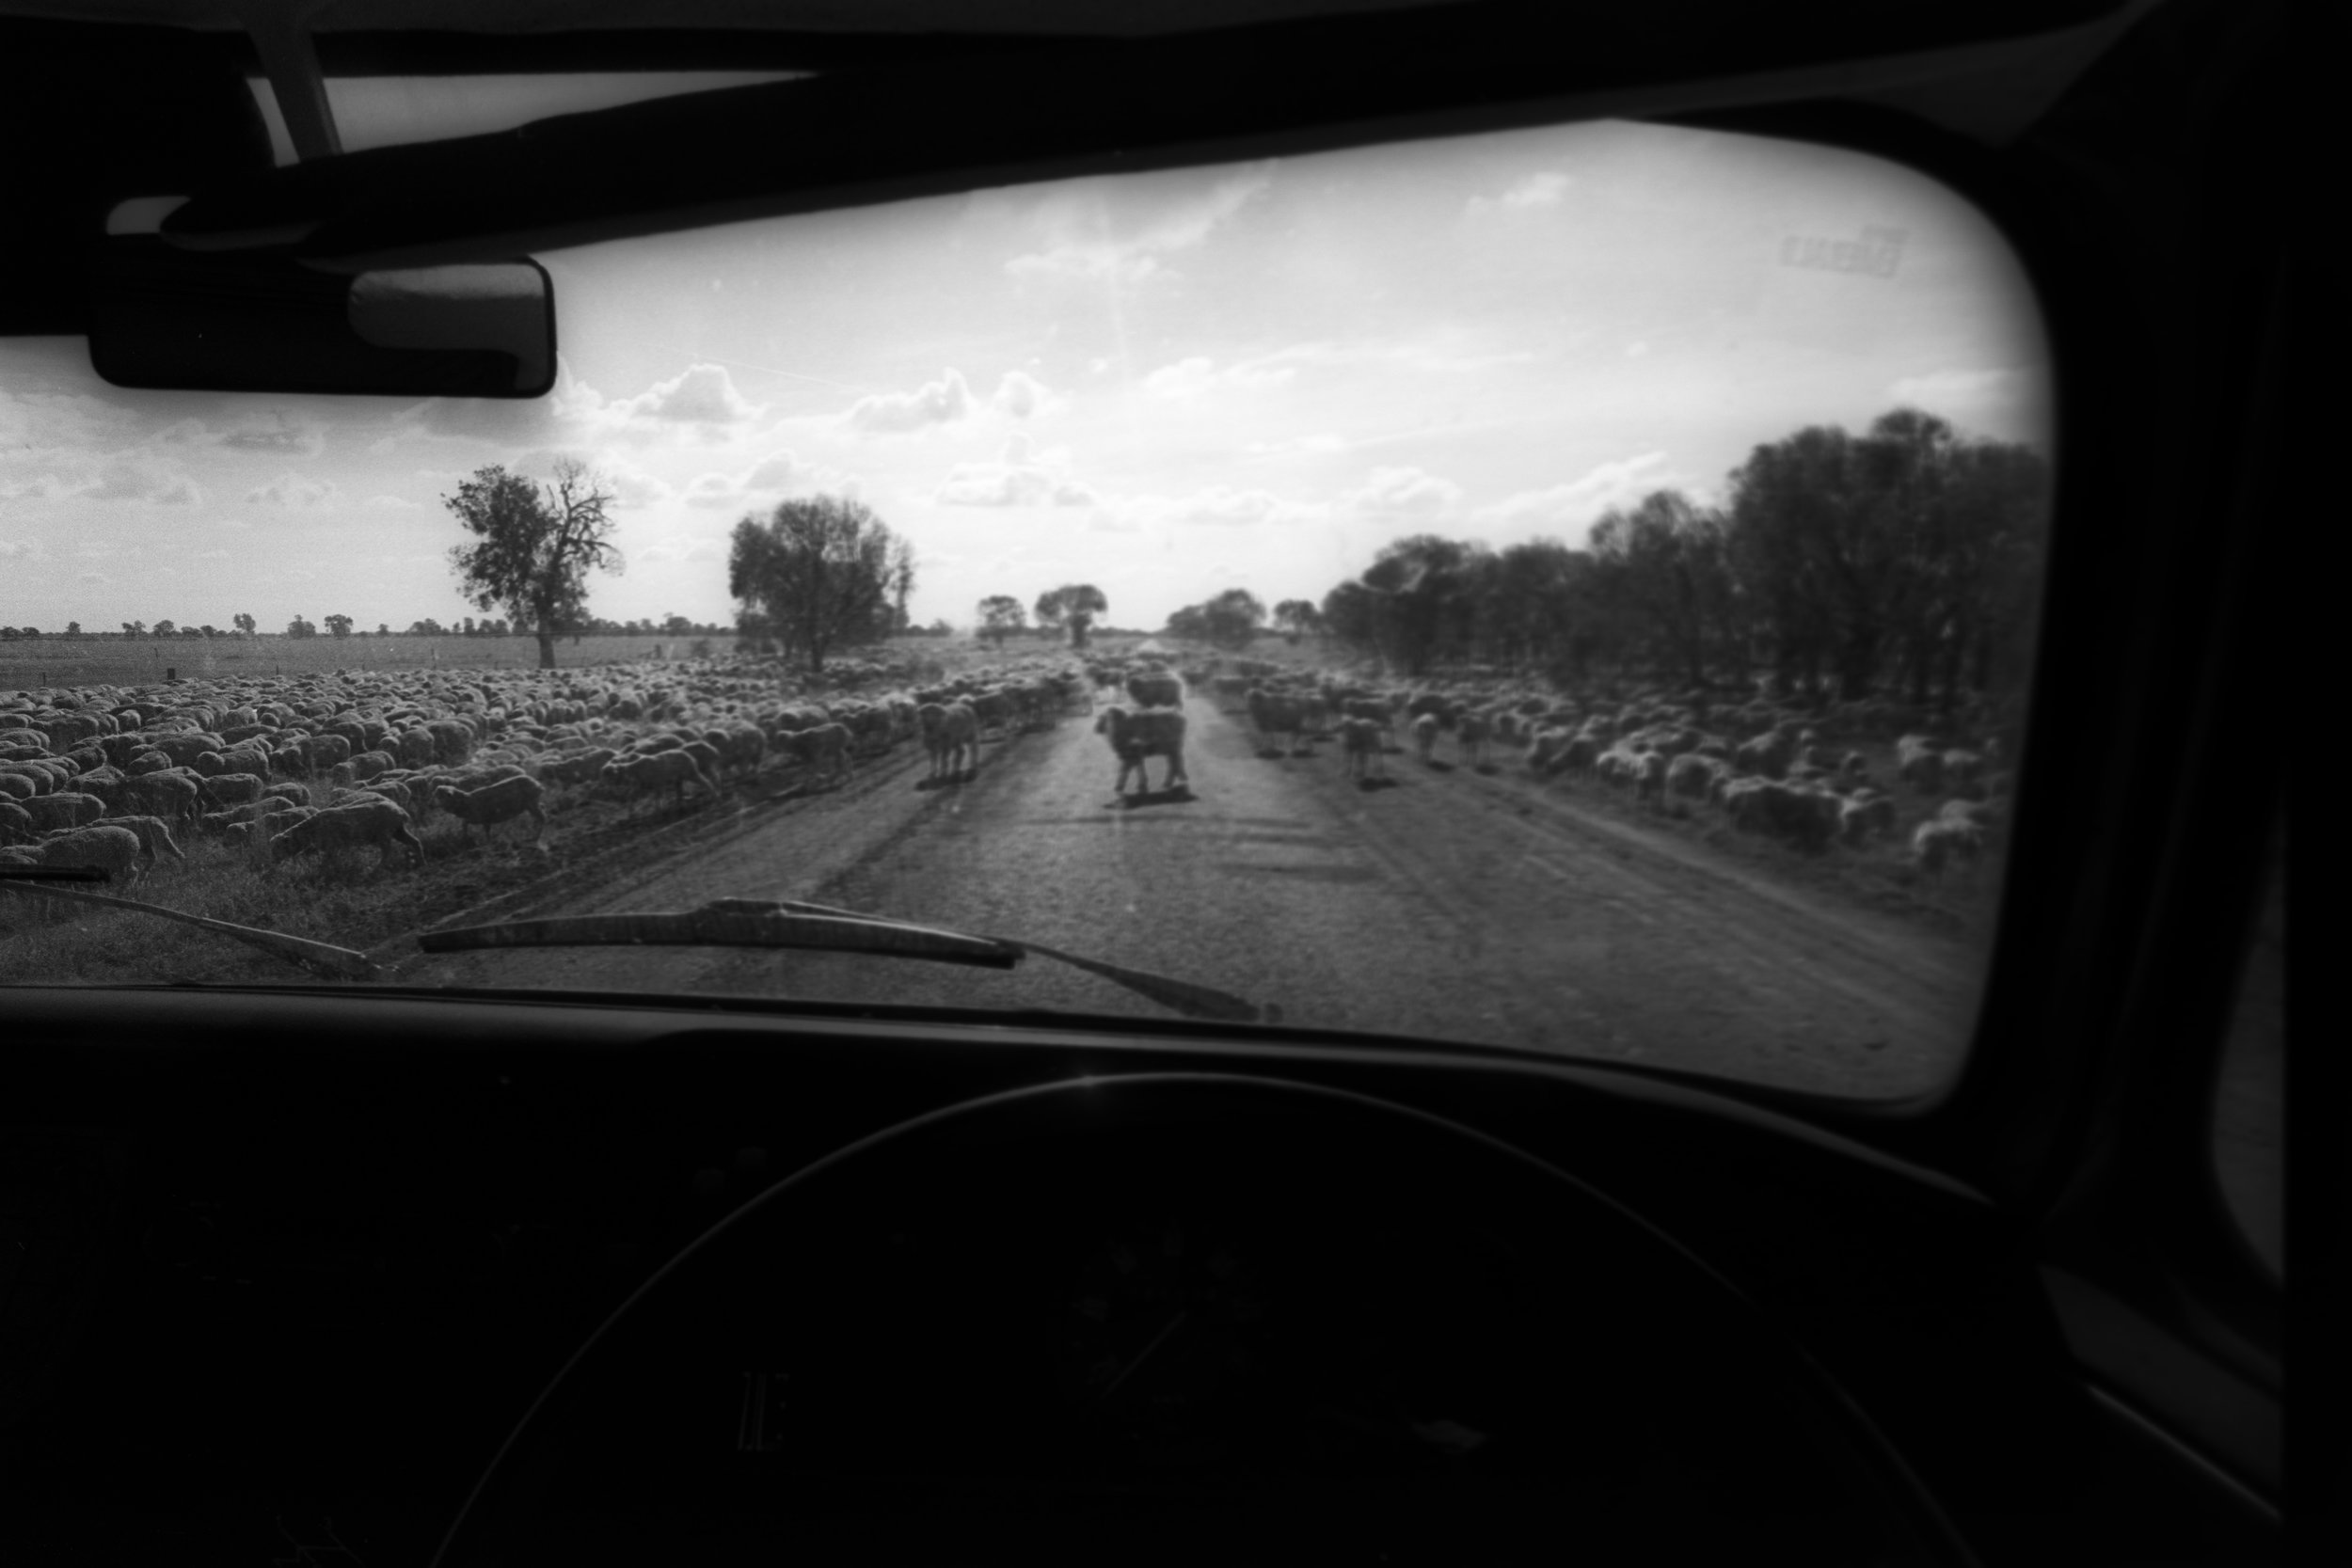  Colloquially know as the ‘longest paddock’. During drought times in outback Australia, sheep are driven onto the verges of inland highways so they can feed on the remaing available grass. Outback NSW, Australia. 1995 